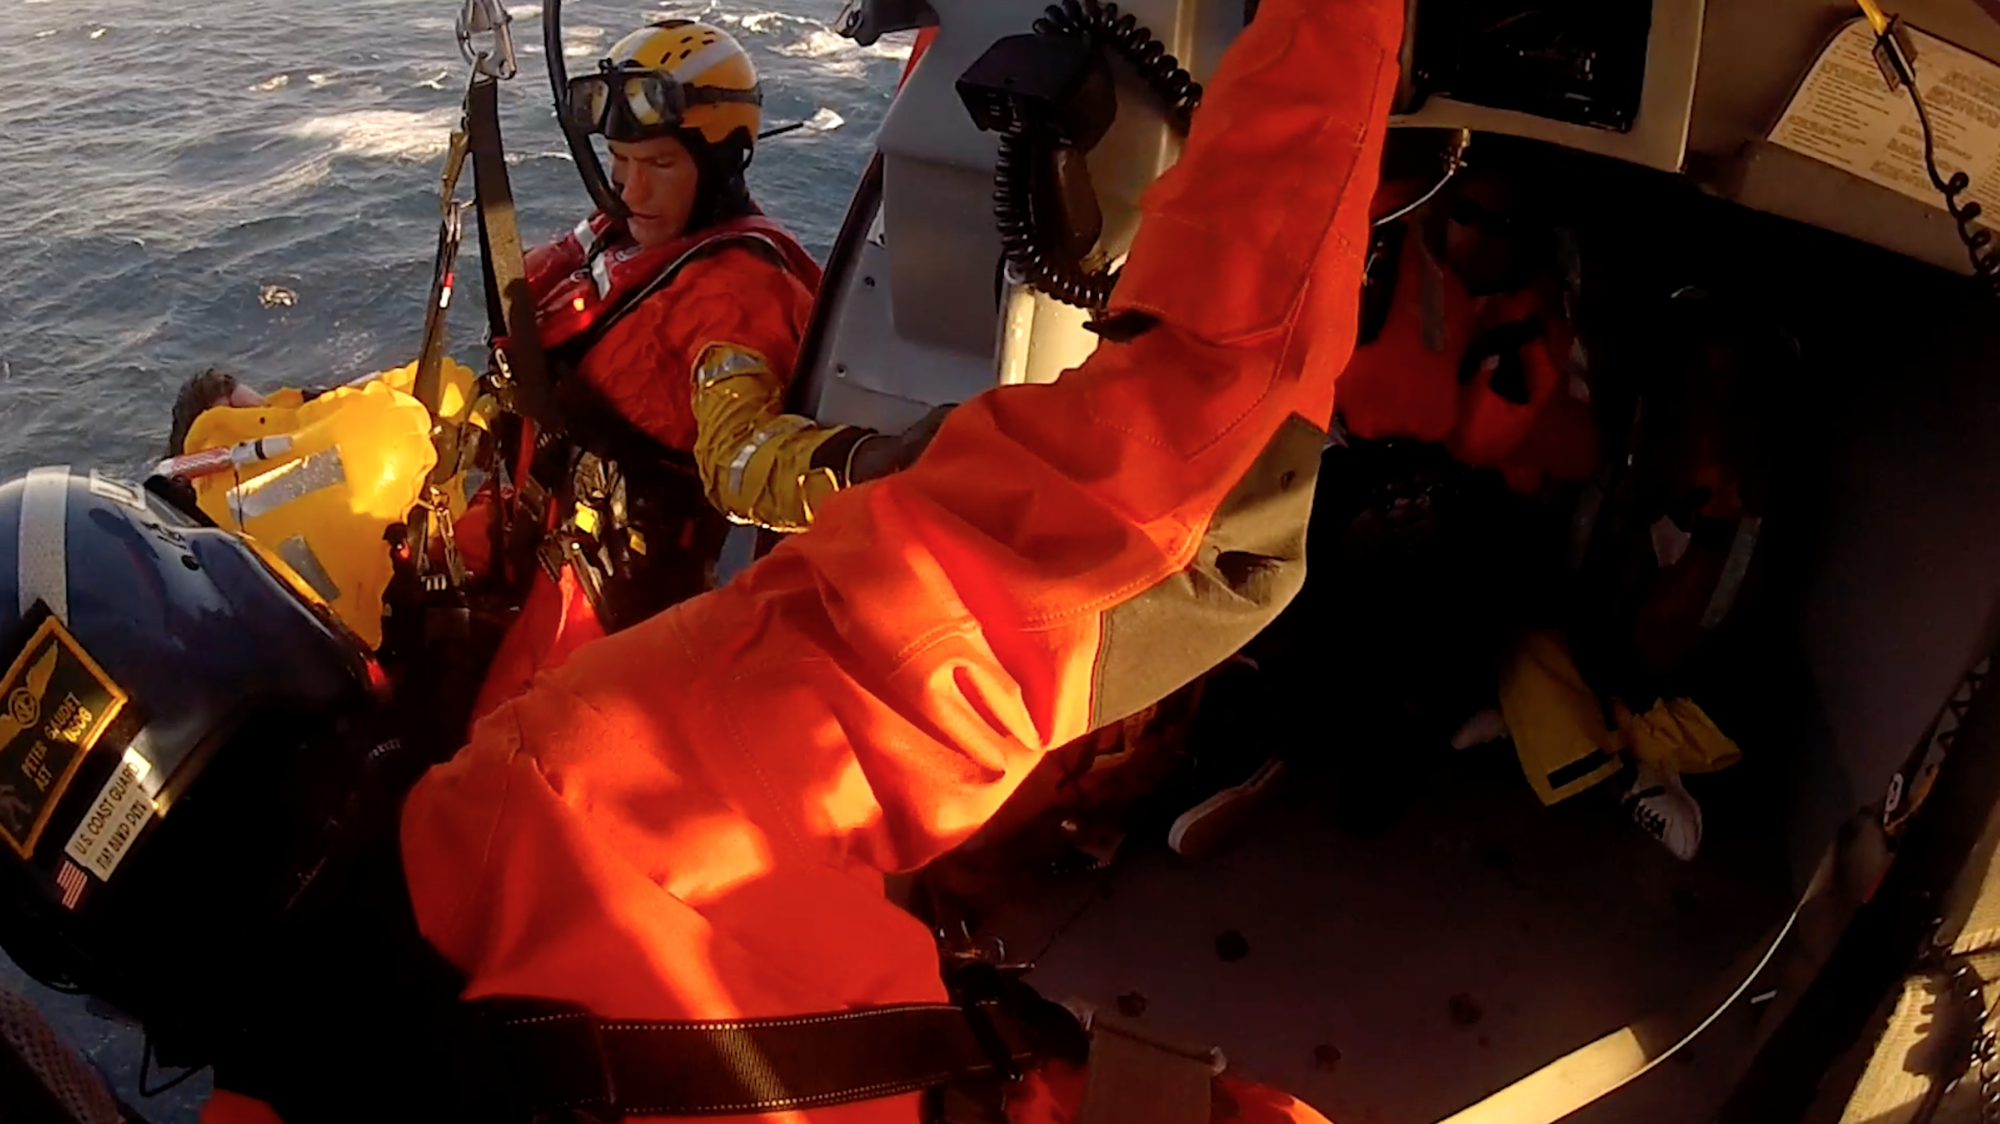 VIDEO AVAILABLE: Coast Guard rescues 6 from vessel taking on water 80 miles west of Crescent City 